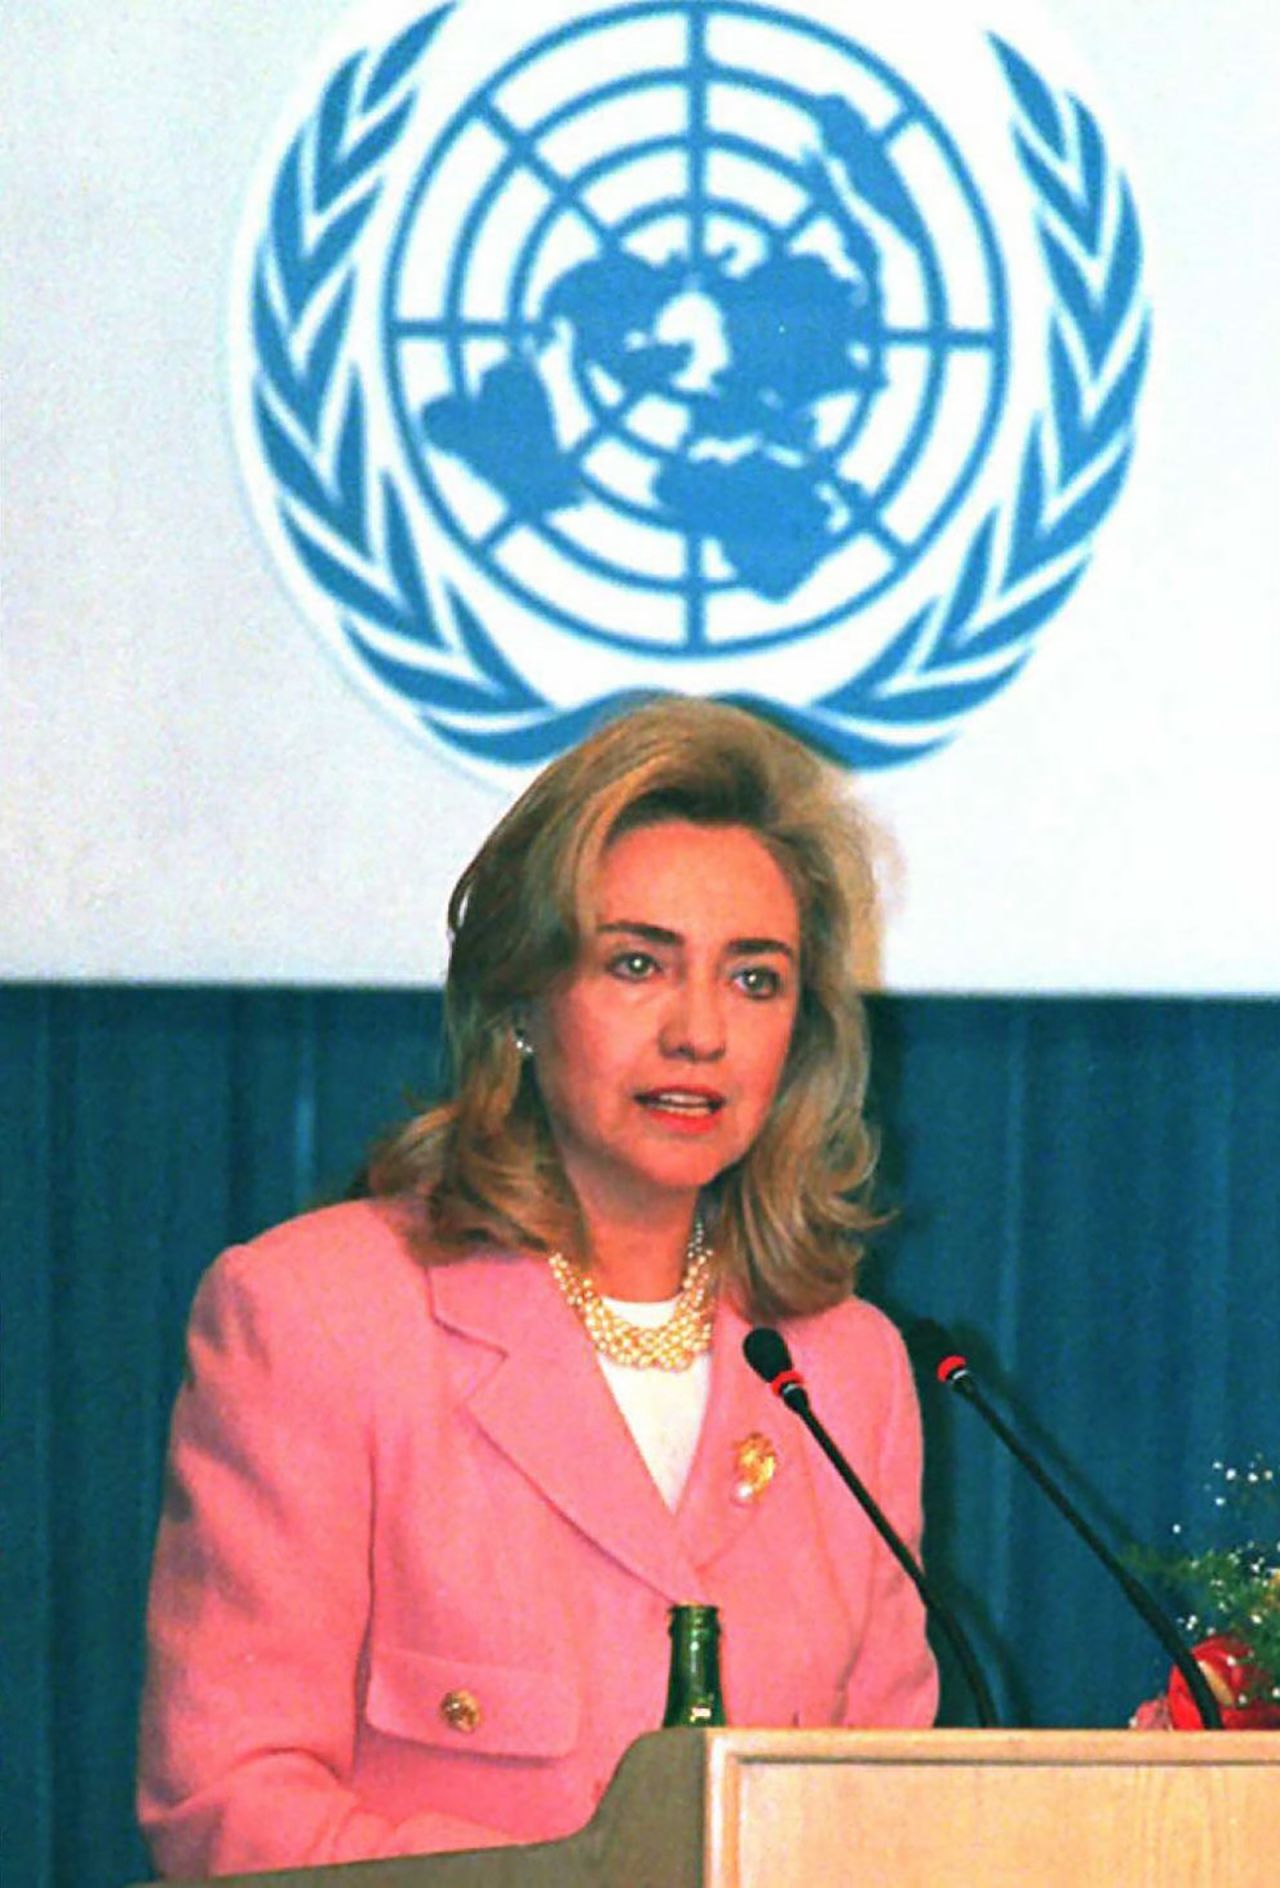 Hillary Clinton, dressed in a pink power suit, speaks in Beijing in 1995 at the UN Fourth World Conference.